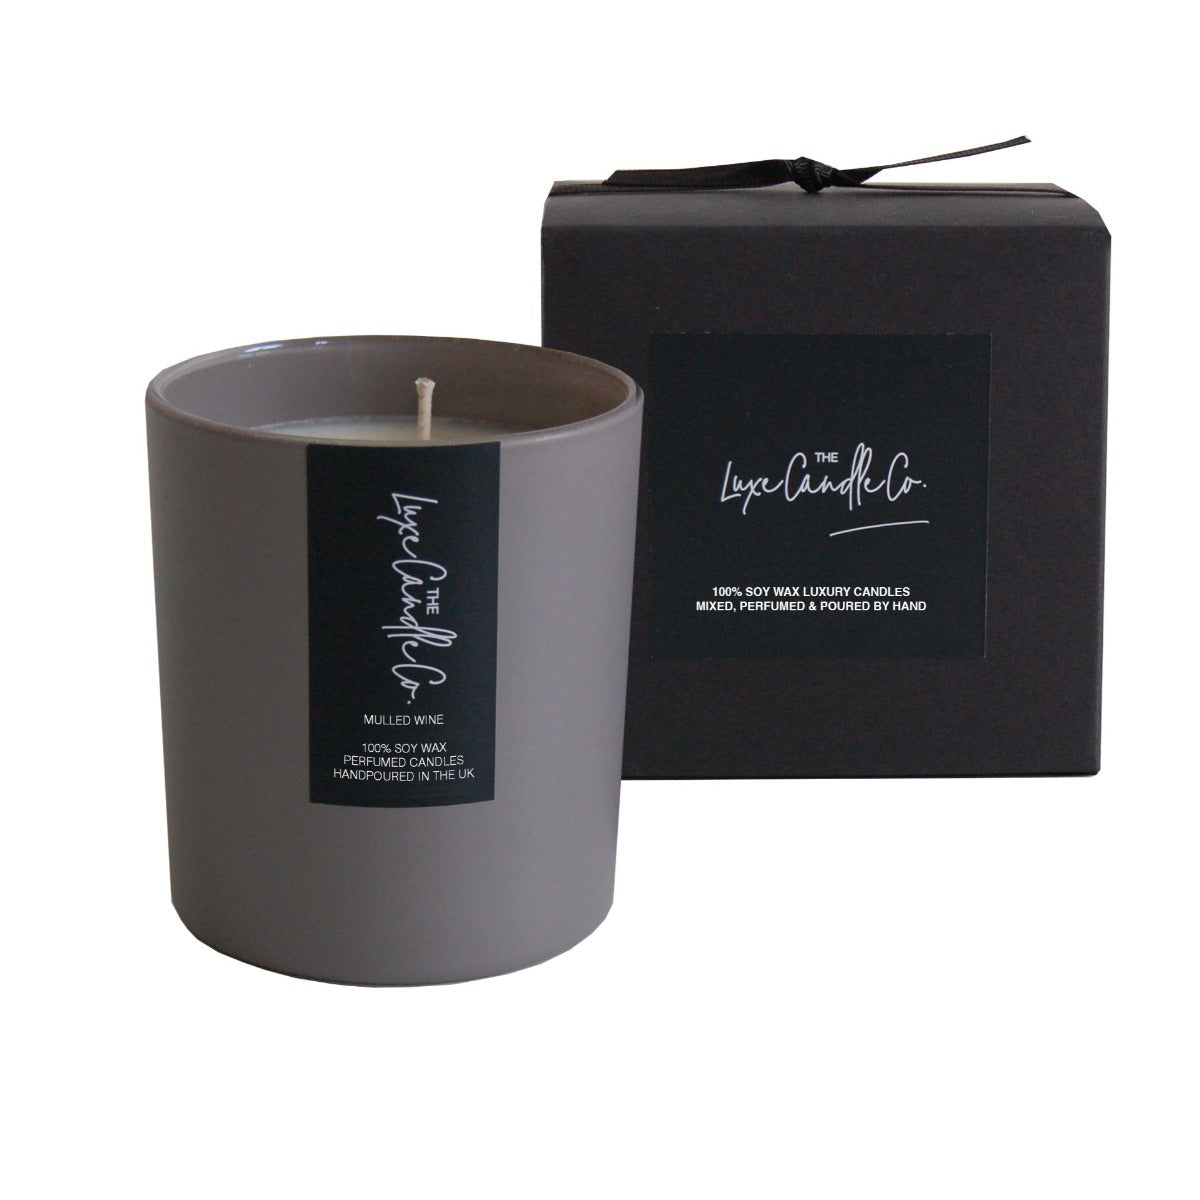 Grey Mulled wine soy candle